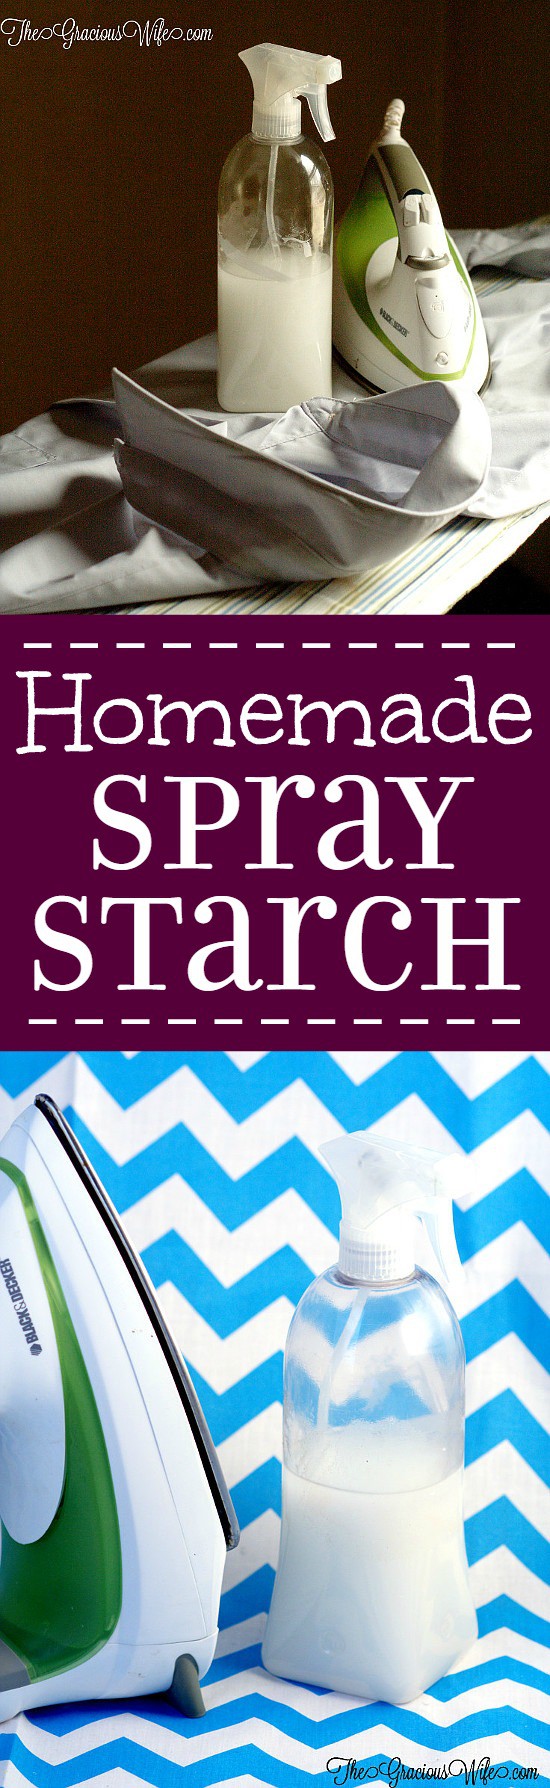 Homemade Ironing Starch - Did you know you can make your own DIY spray starch for ironing? What an amazing life hack!